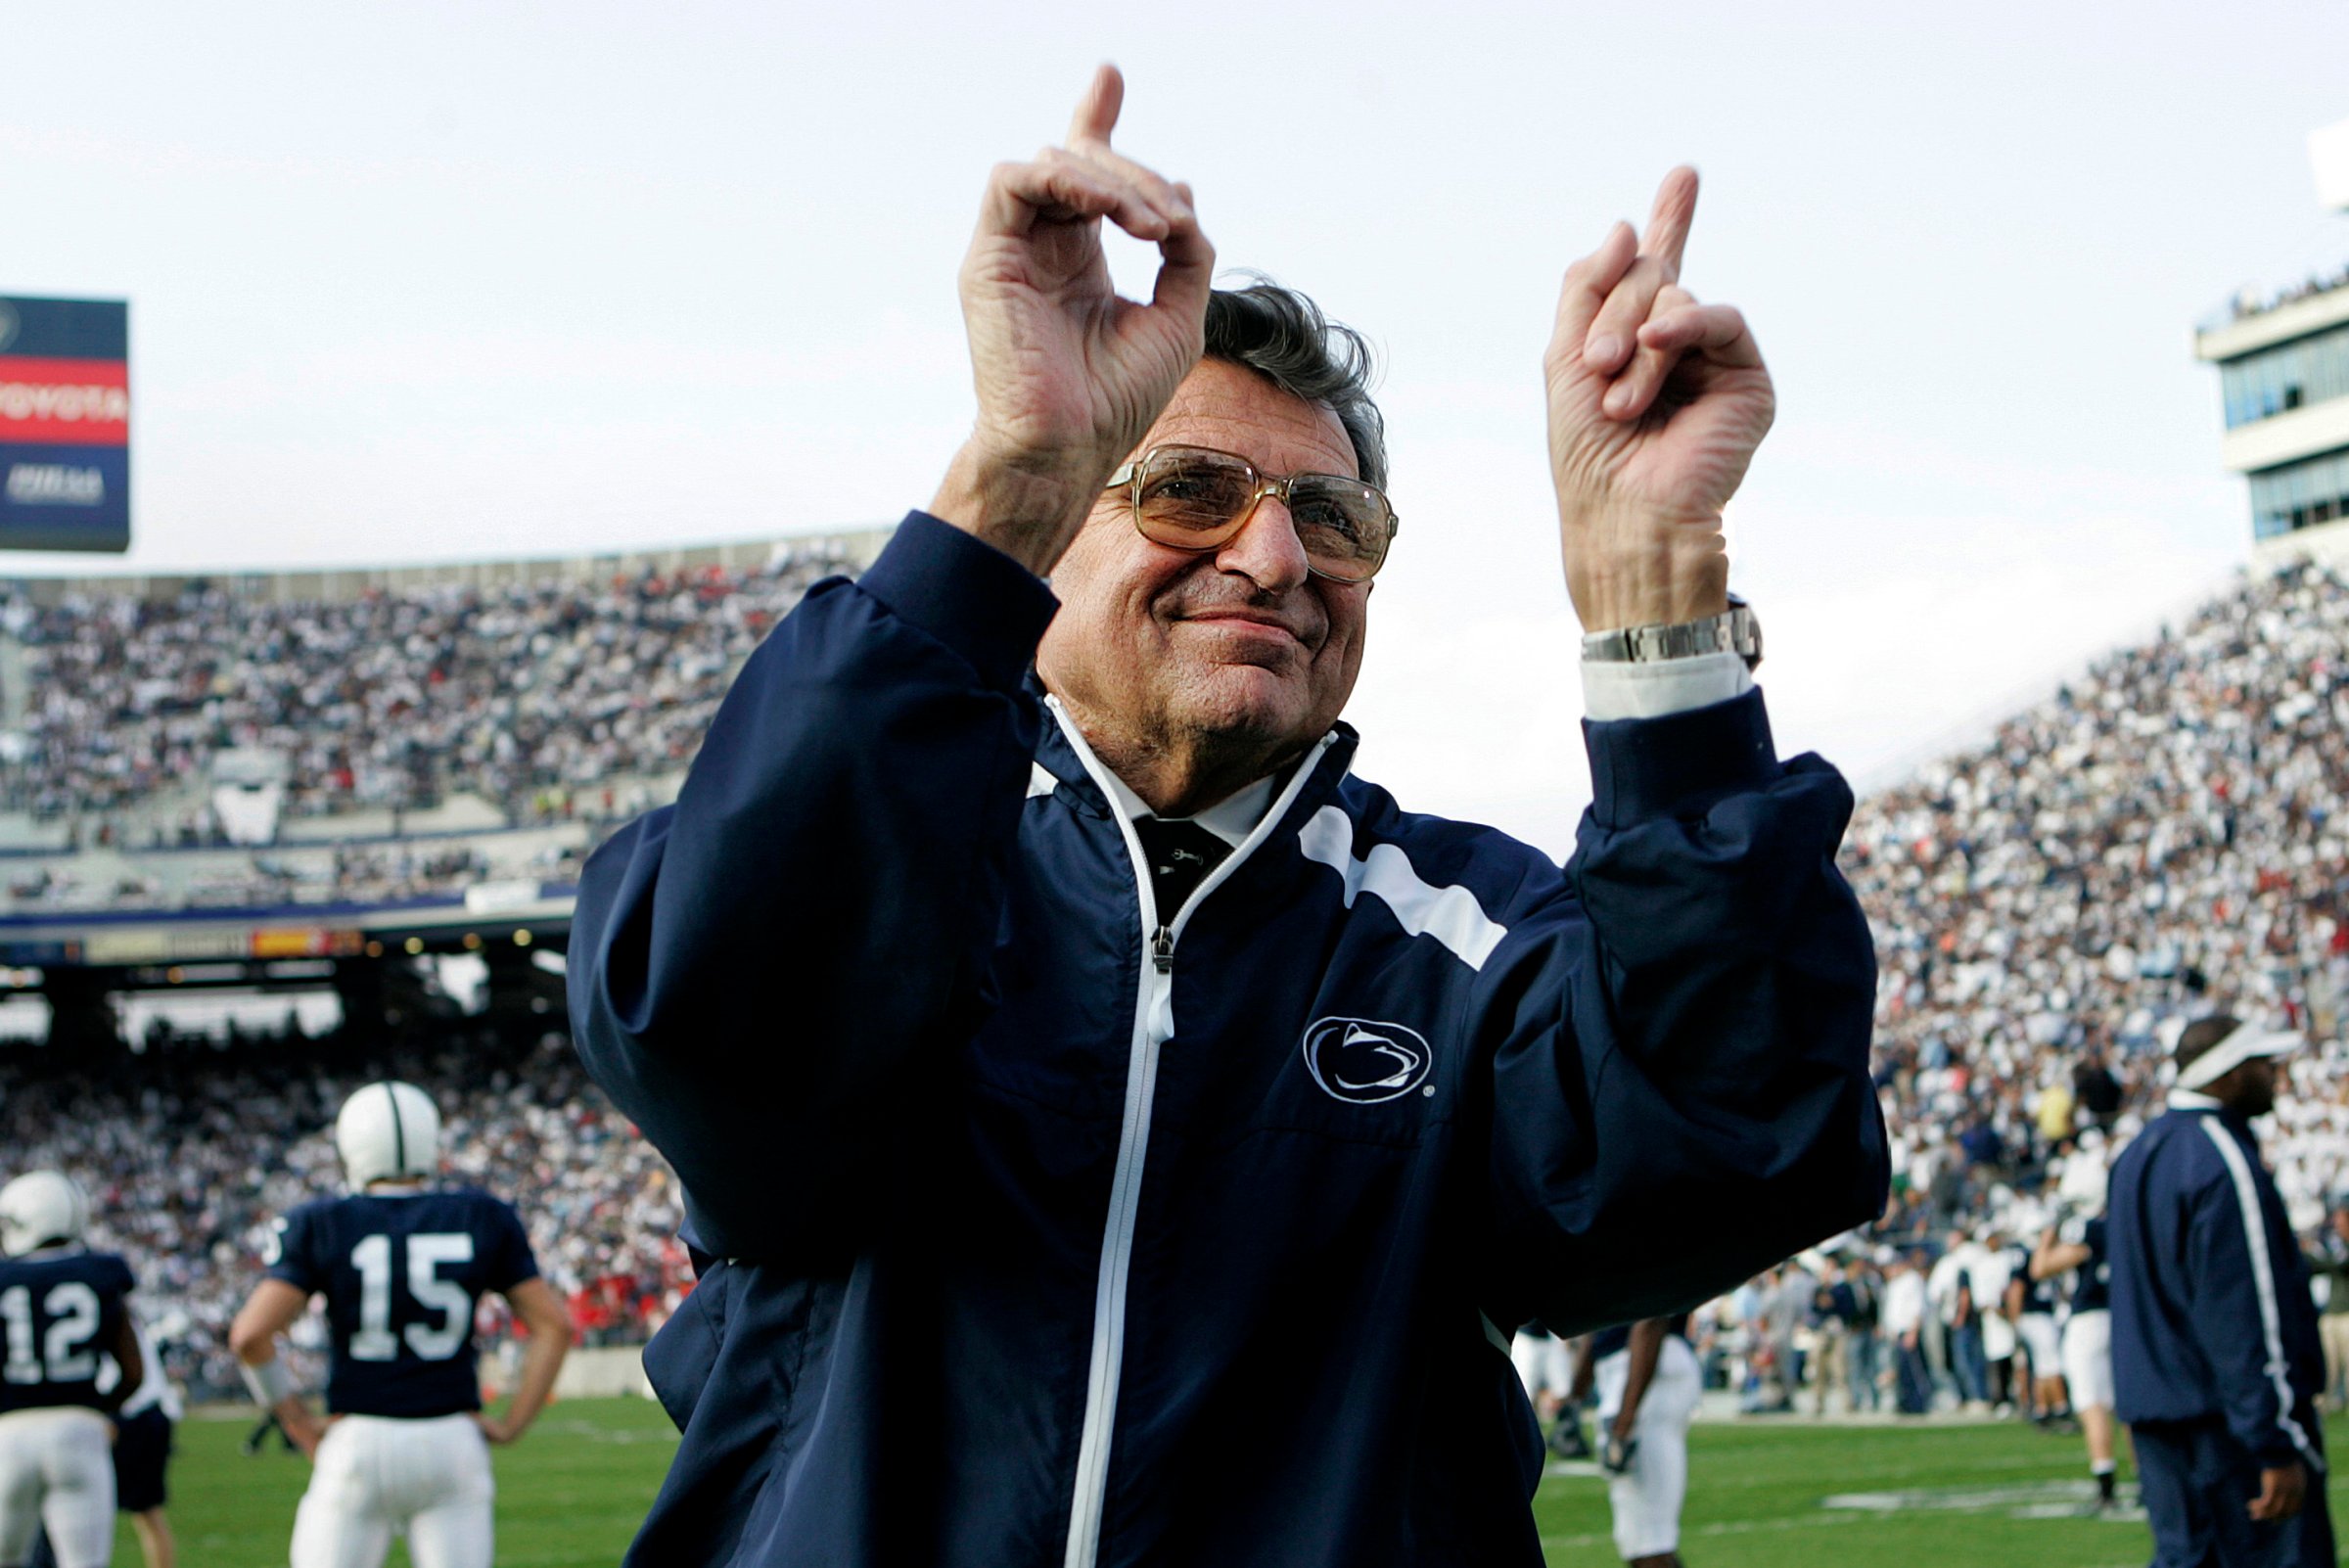 Penn State football coach Joe Paterno acknowledges the crowd before an NCAA college football game against Wisconsin in State College, Pa. on Nov. 5, 2005.